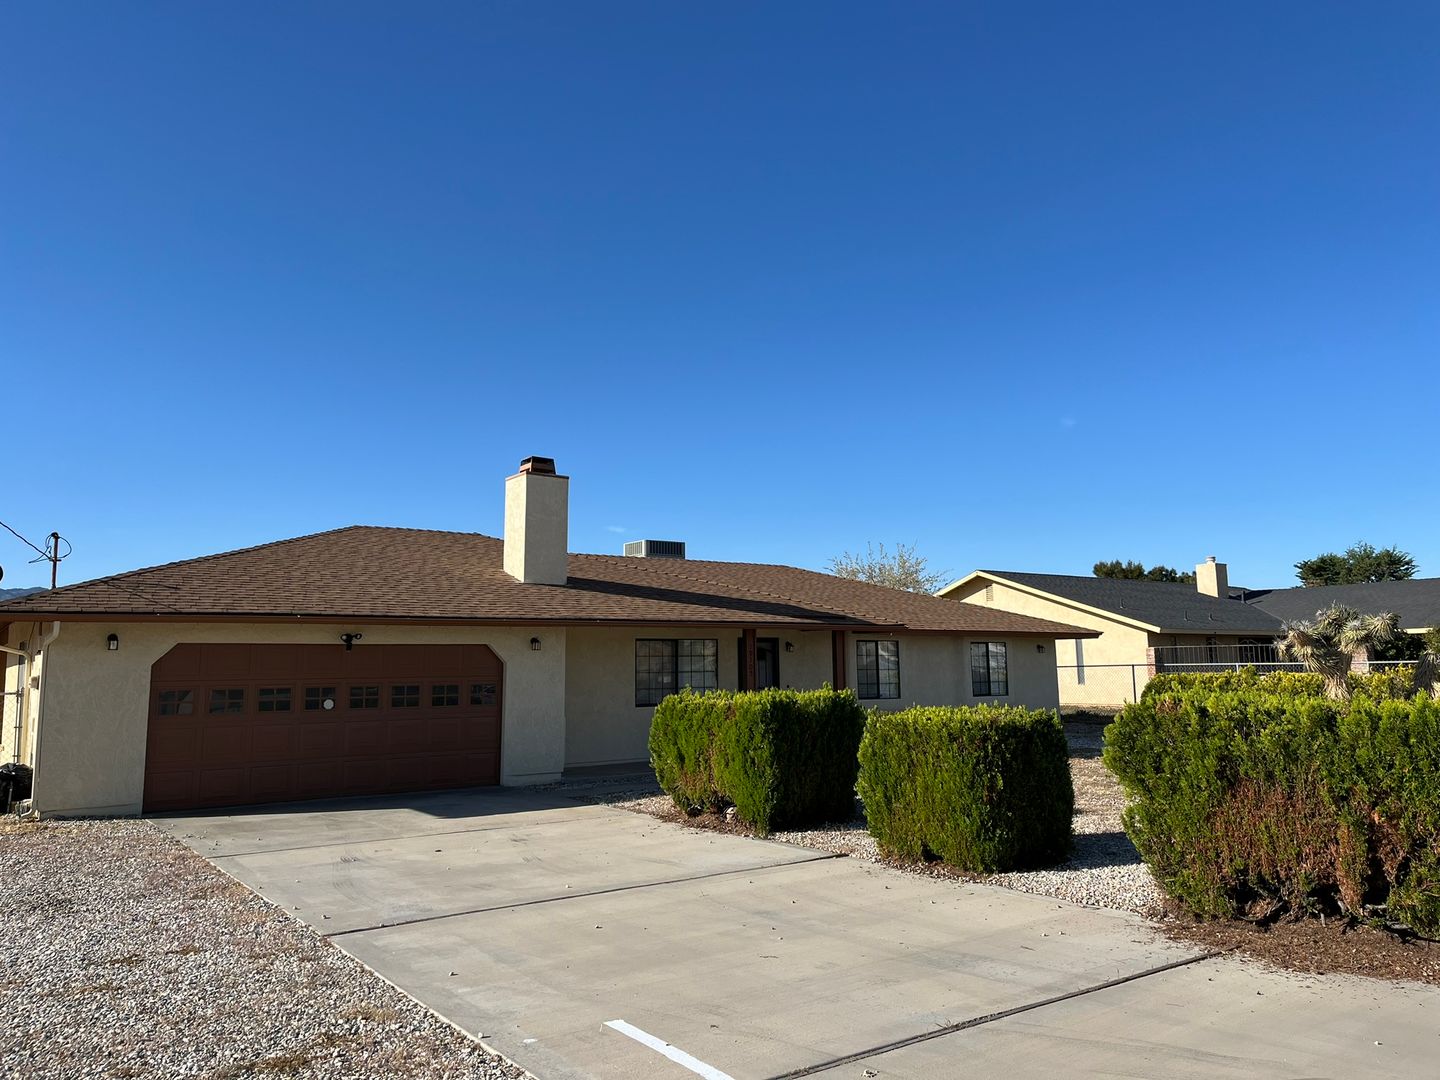 Welcome to this charming 3-bedroom, 2-bathroom home in Hesperia, CA.